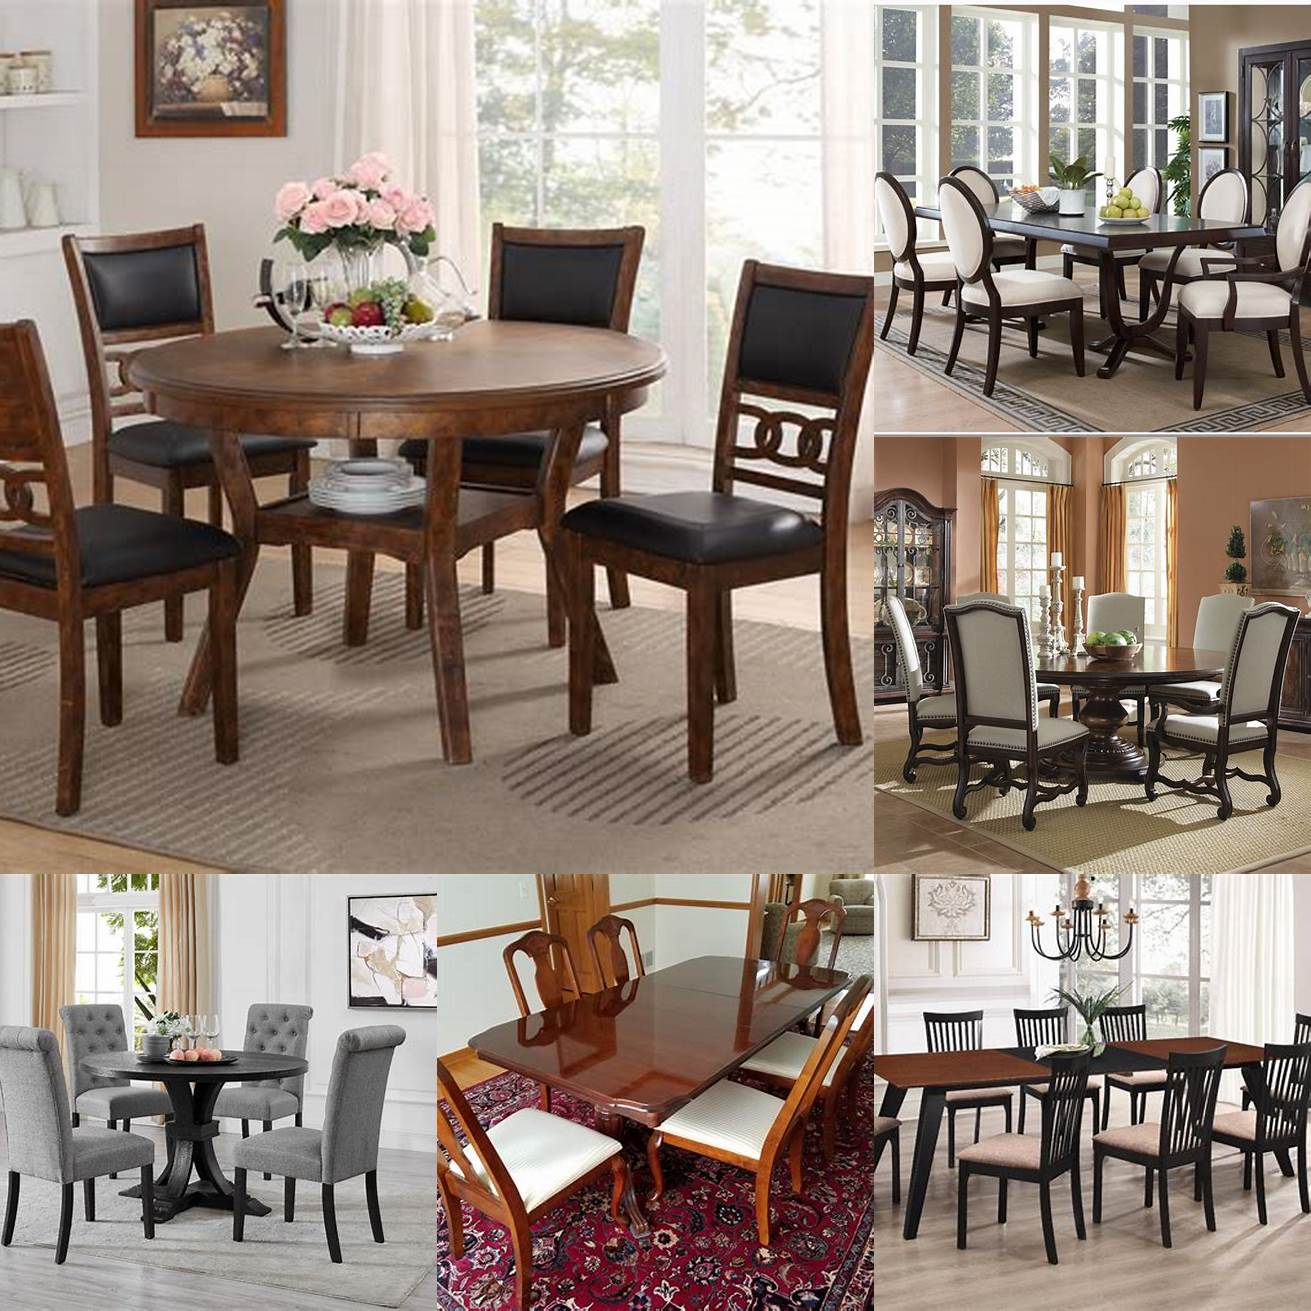 A beautiful dining table and chairs set